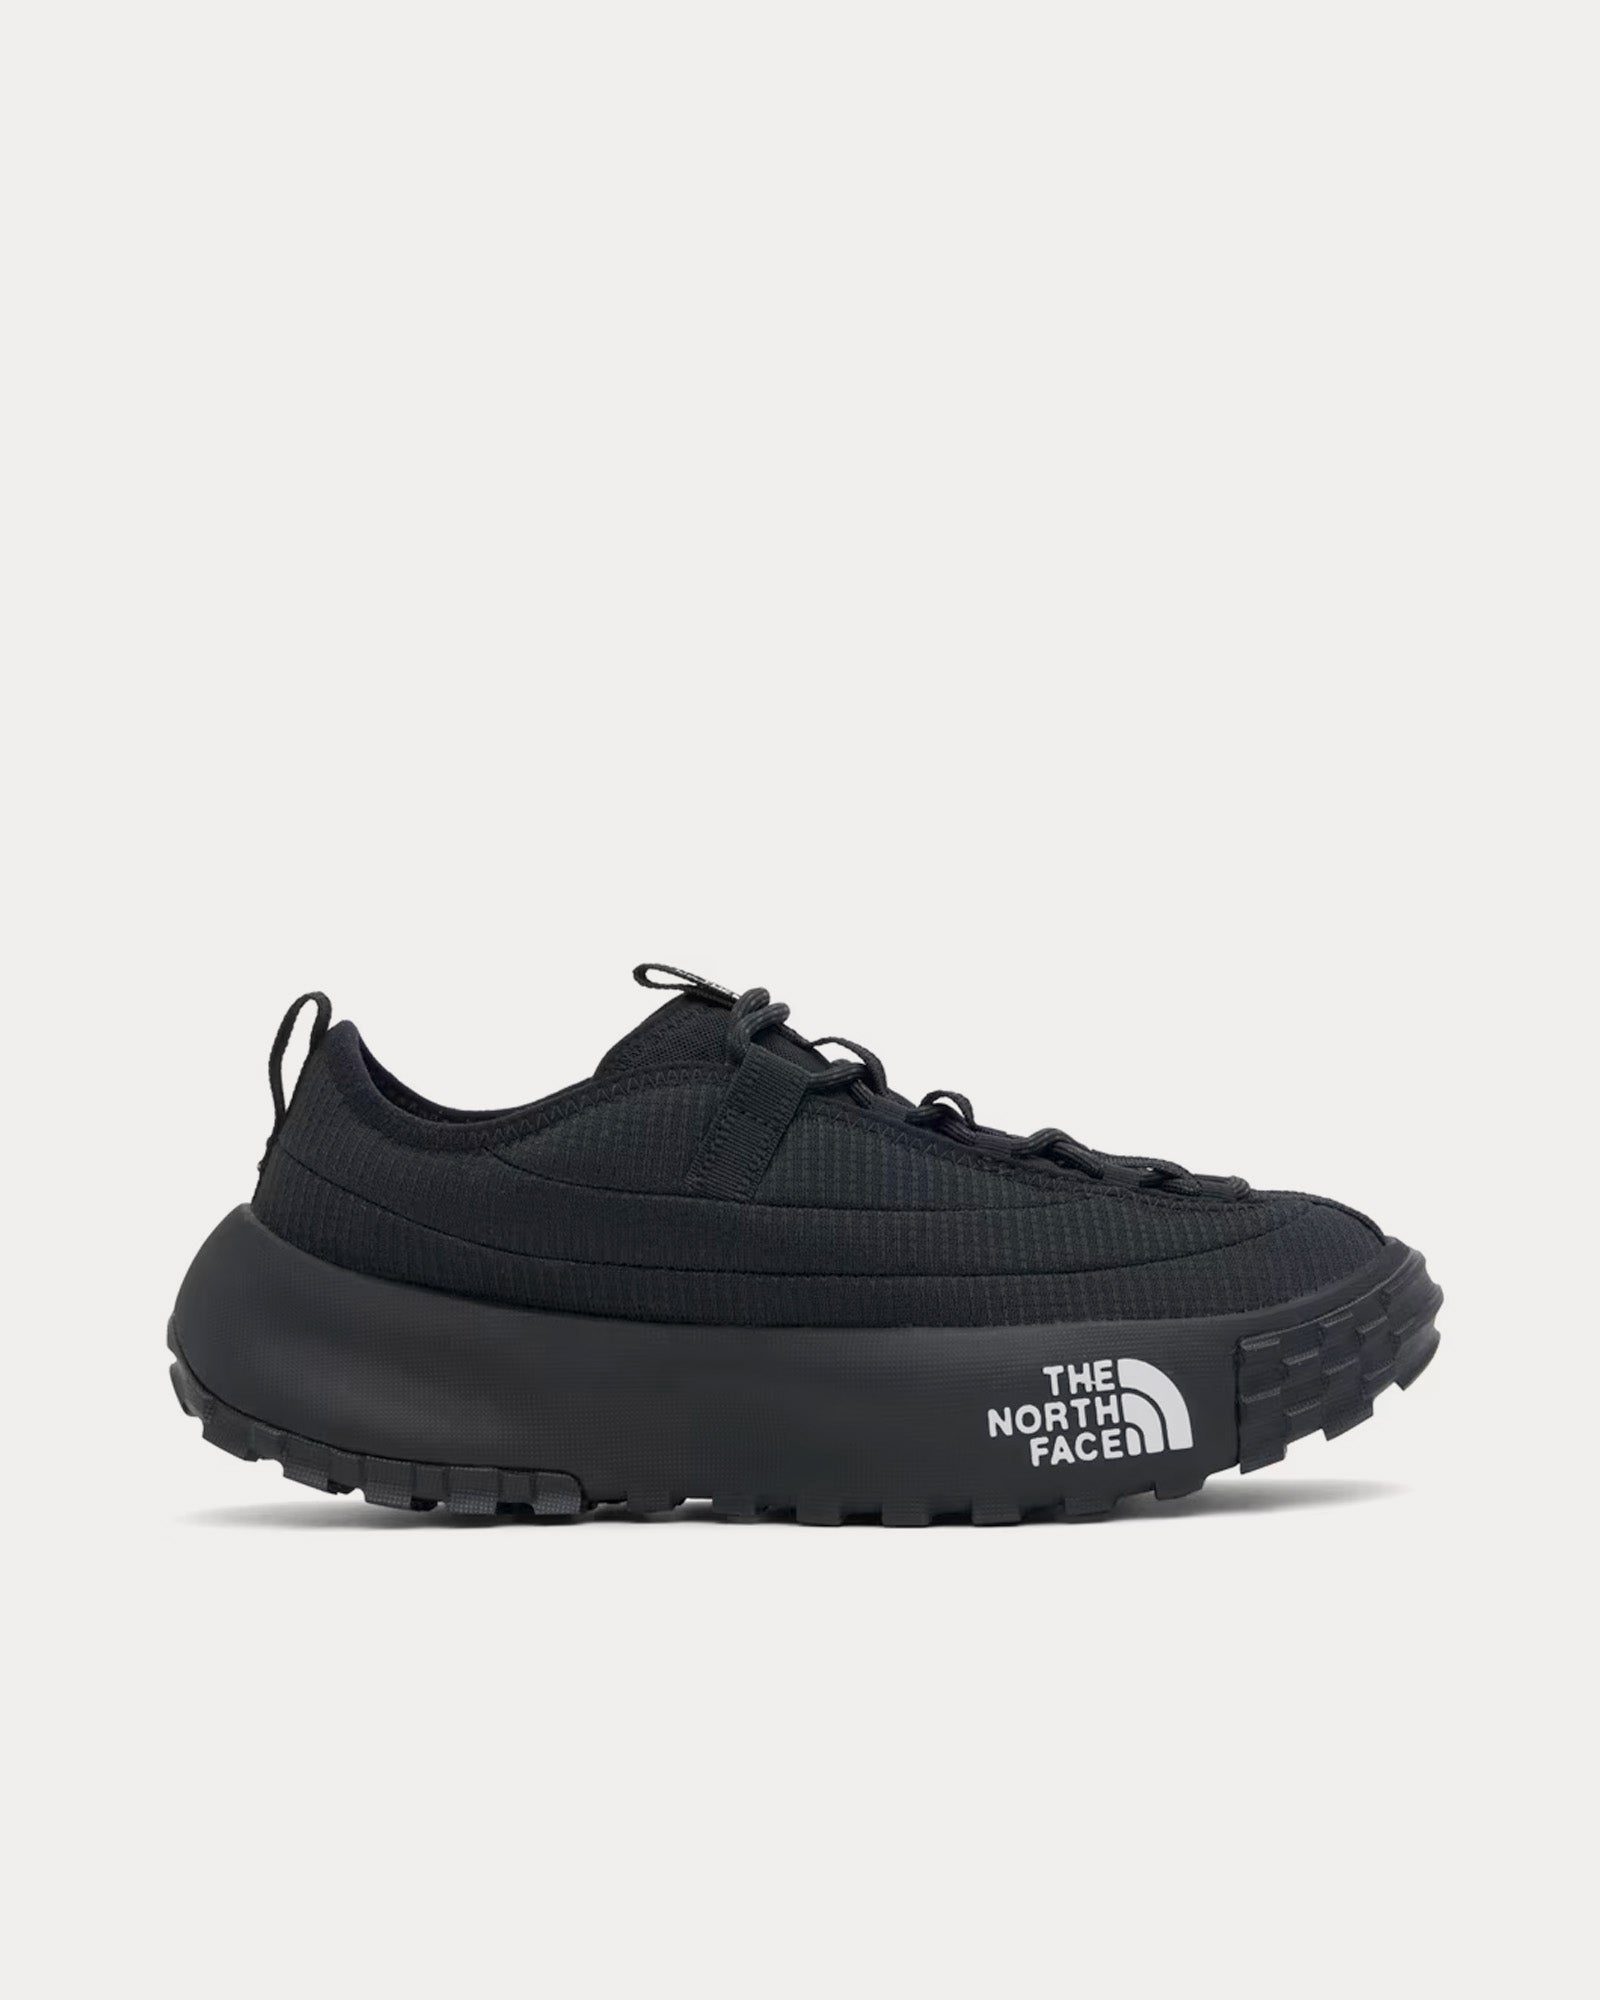 The North Face - Never Stop TNF Black / TFN Black Low Top Sneakers